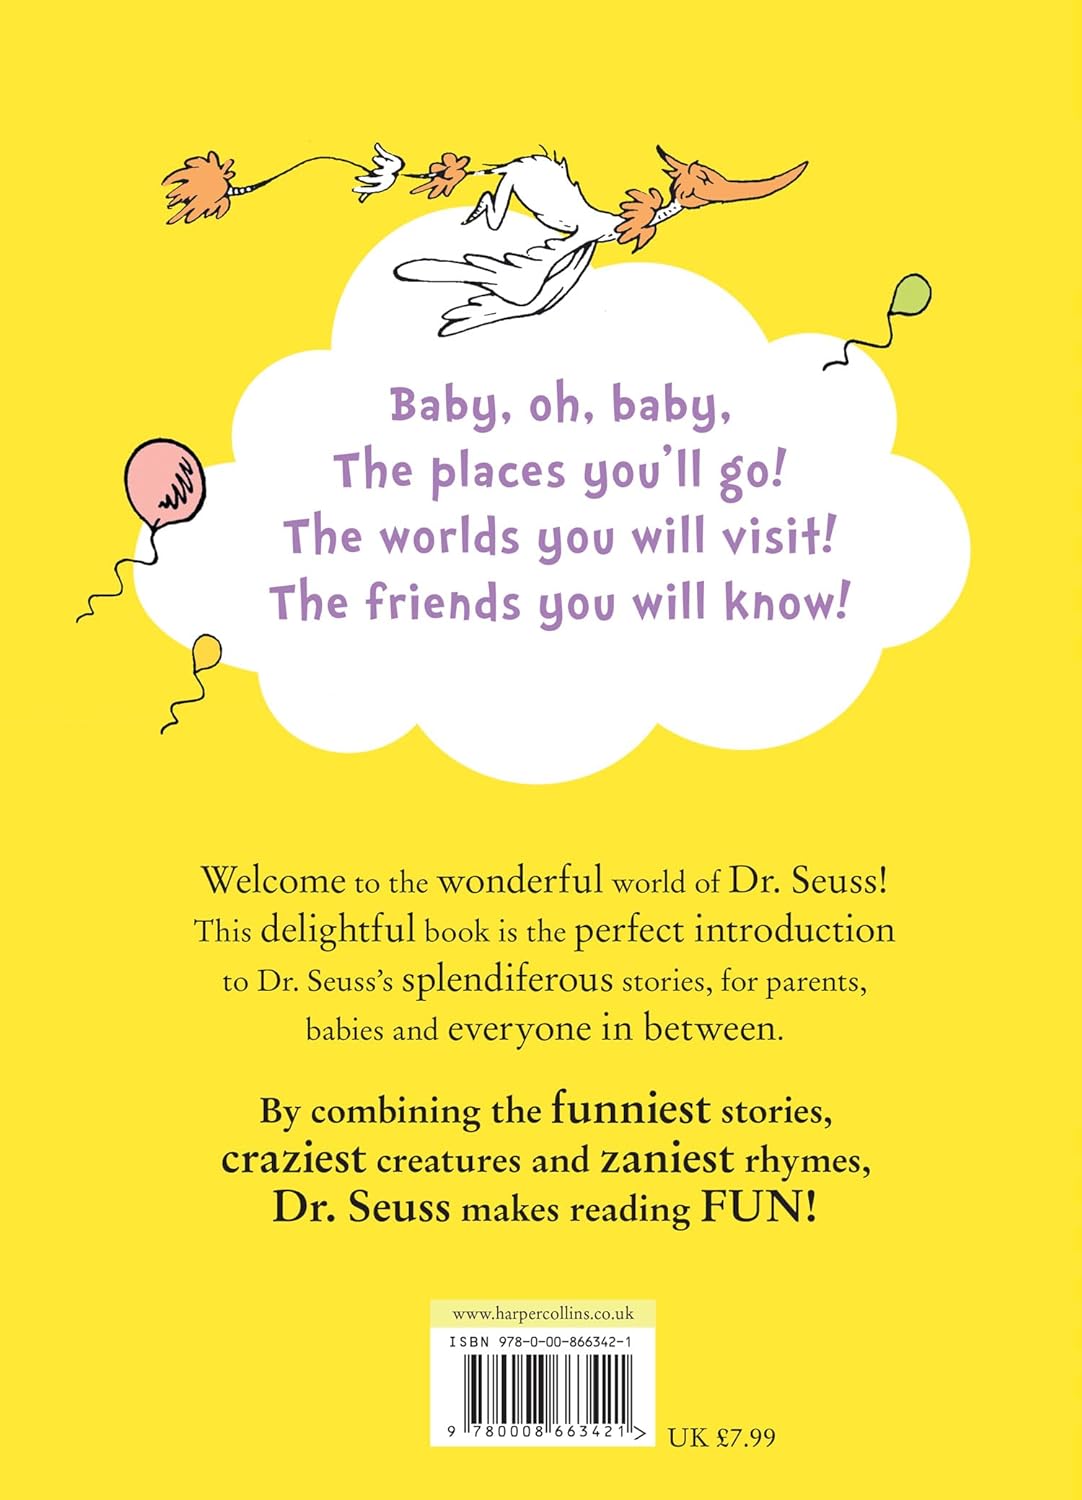 Dr. Seuss: Oh, Baby, The Places You will Go